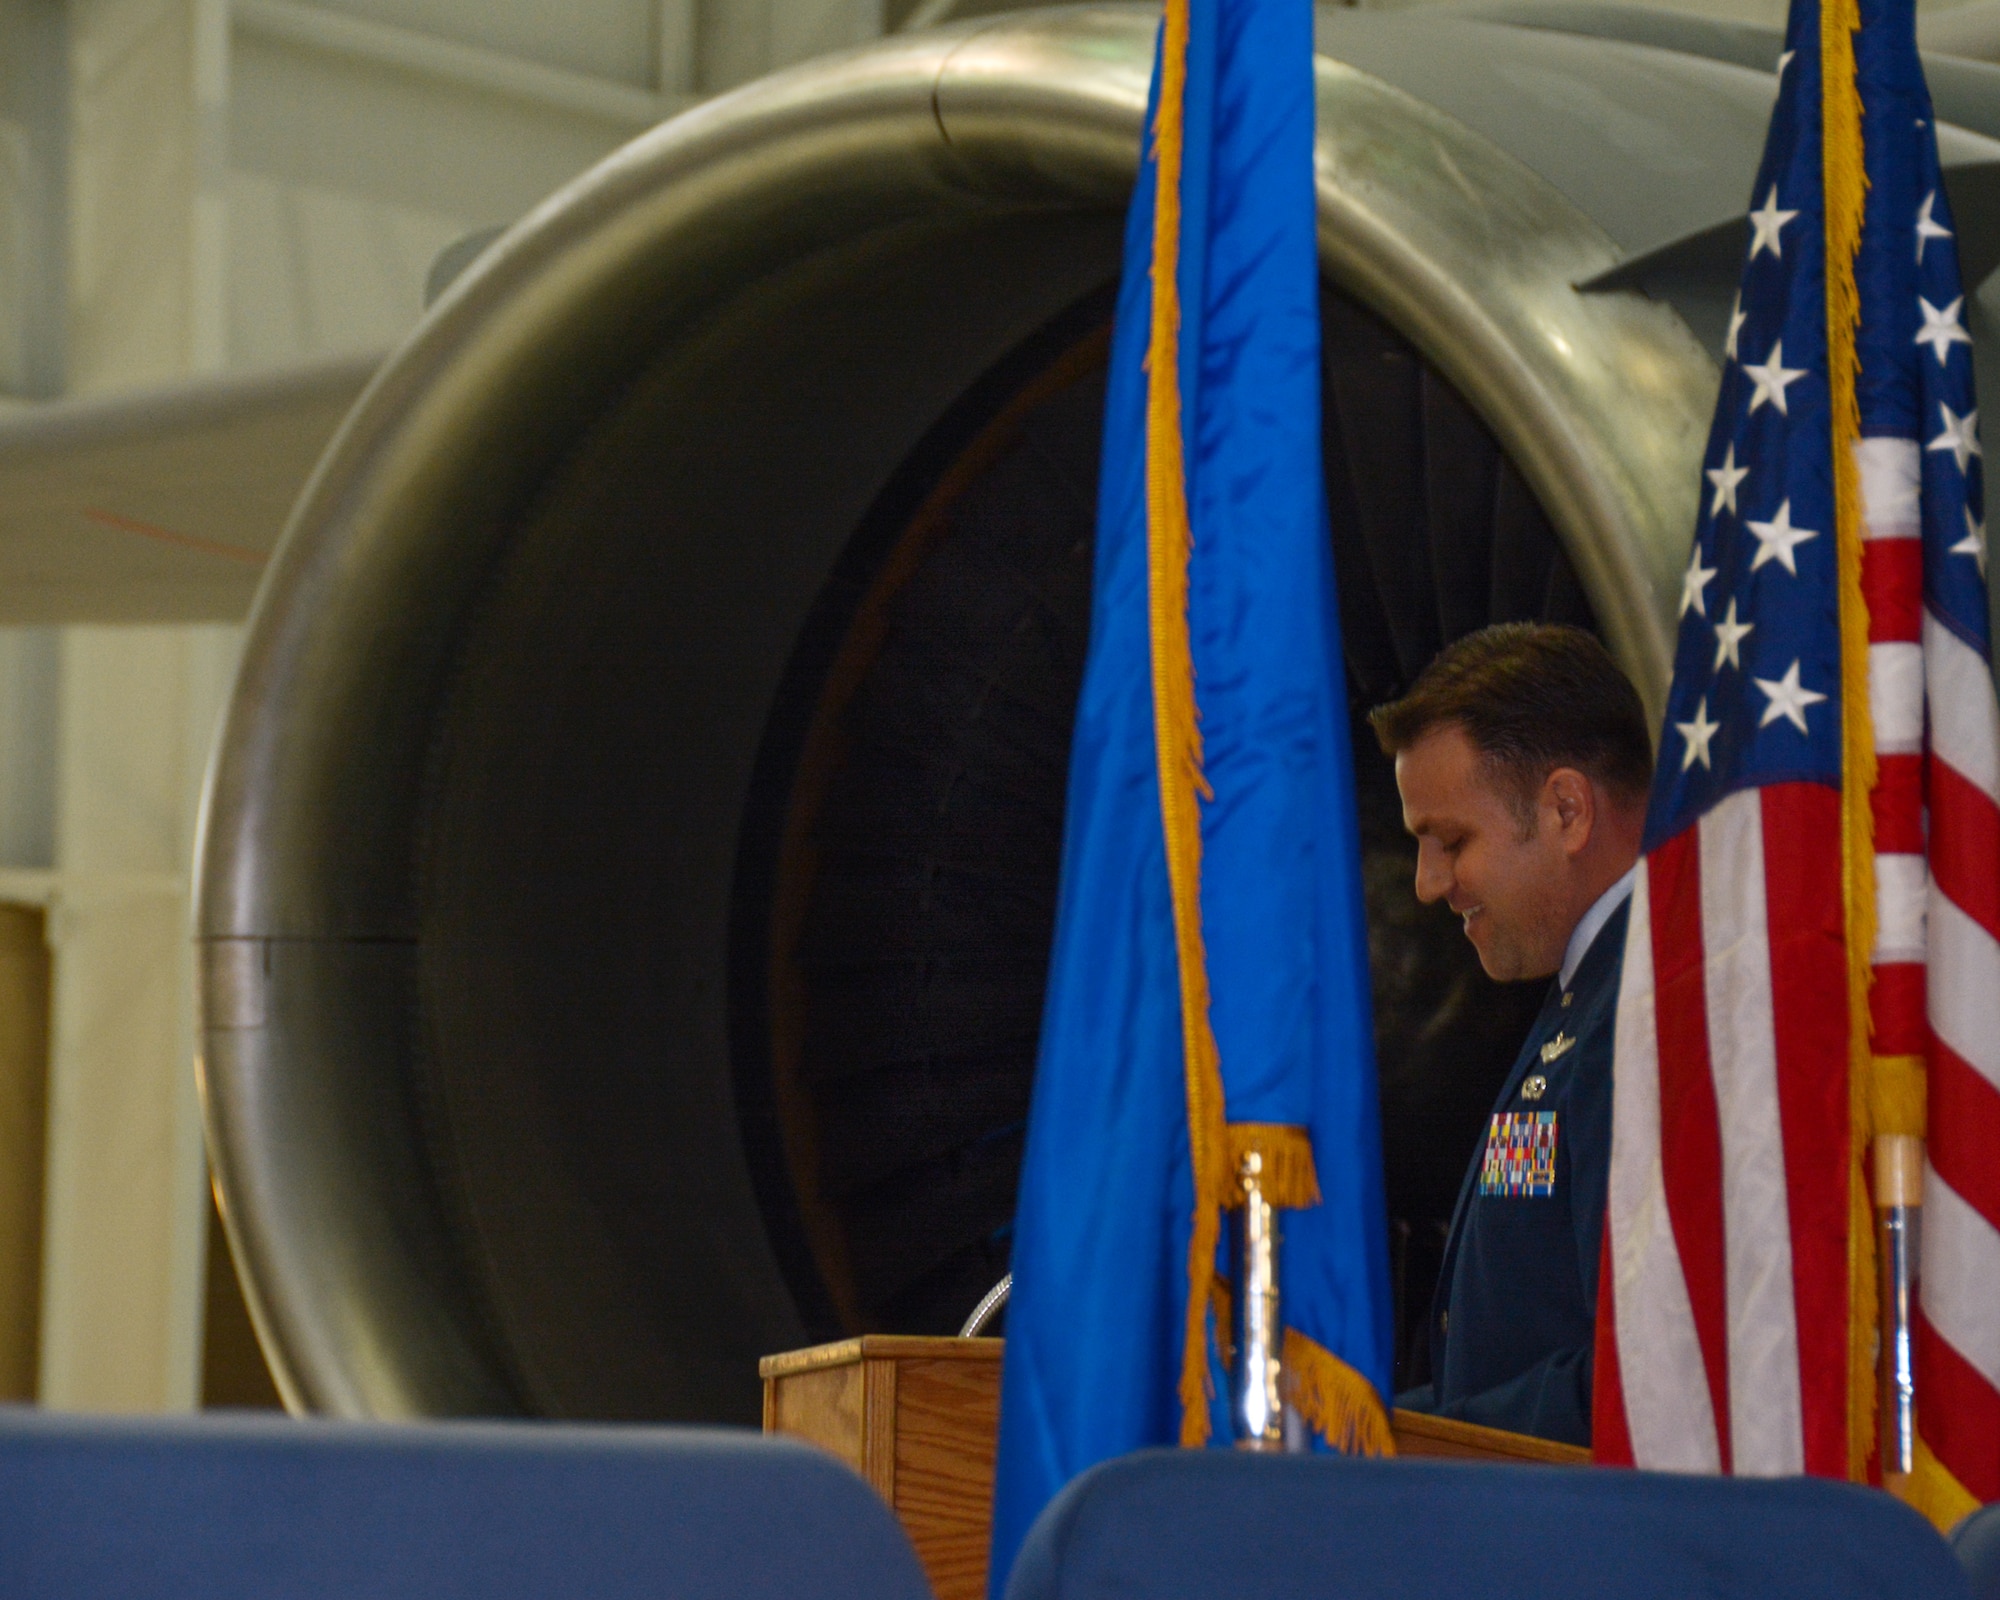 U.S. Air Force Lt. Col. Joseph D. Wall, the new 79th Air Refueling Squadron commander, speaks during a change of command ceremony at Travis Air Force Base, Calif., Jan. 7, 2017.  Wall promised transparency, competence and commitment to excel by leveraging the combined experience and talents of the Citizen Airmen under his charge.  (U.S. Air Force photo by Senior Airman Chris Massey)